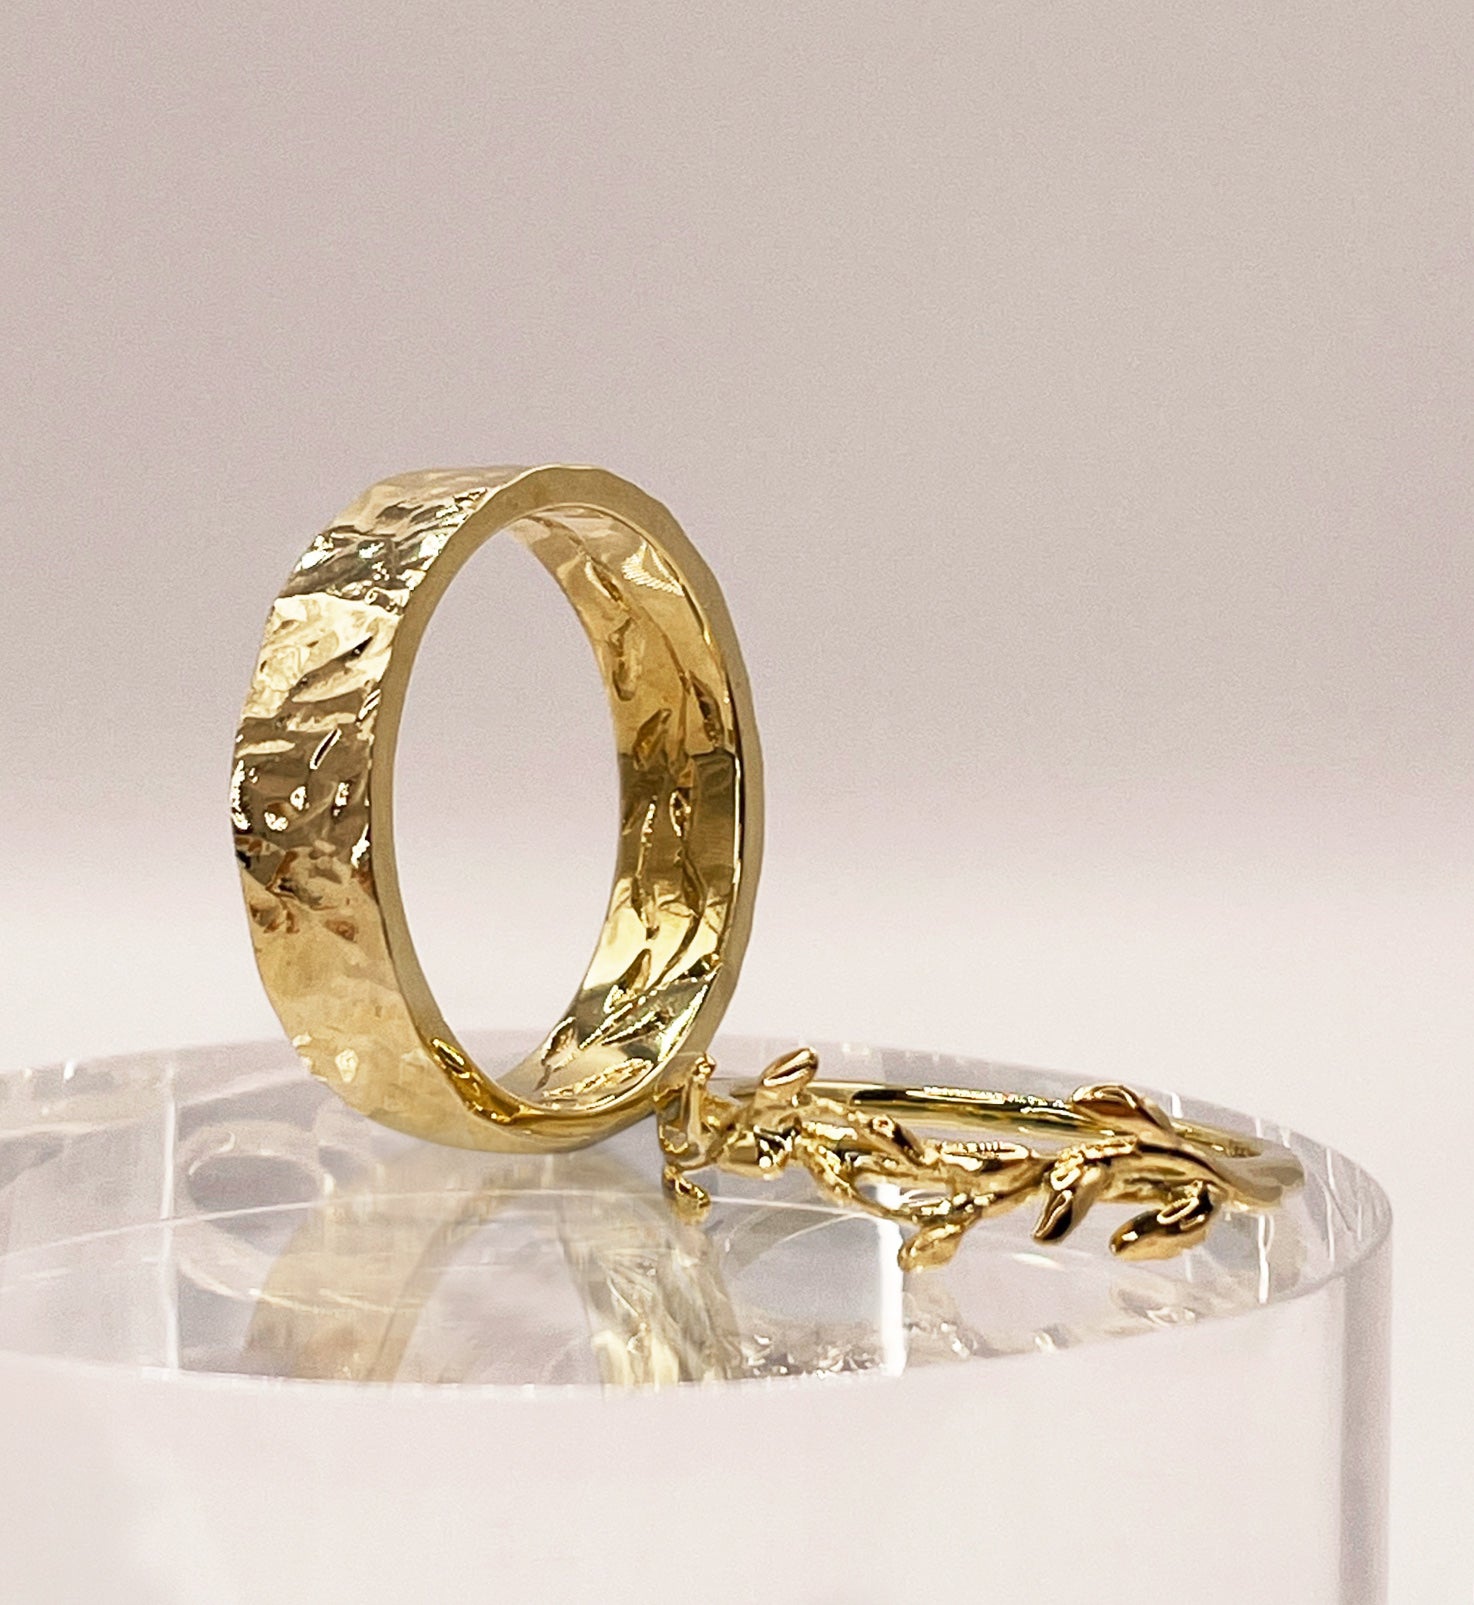 Unique Leaves and Vines Matching Wedding Ring Set for Couples (2 pieces) -Gold Leaves Rings